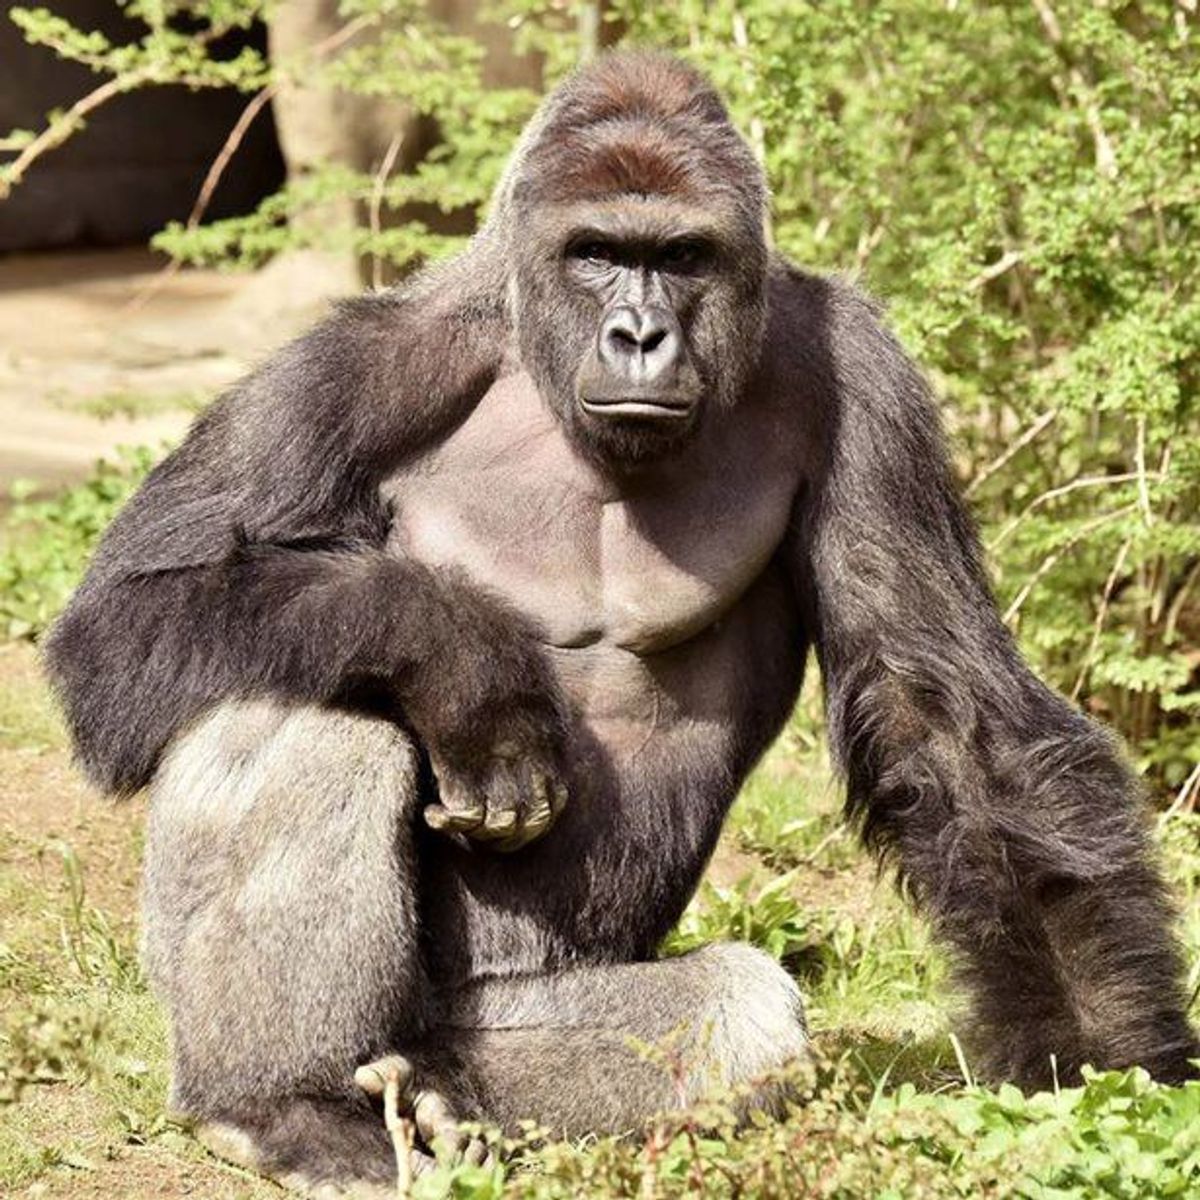 Did Harambe Need To Die?